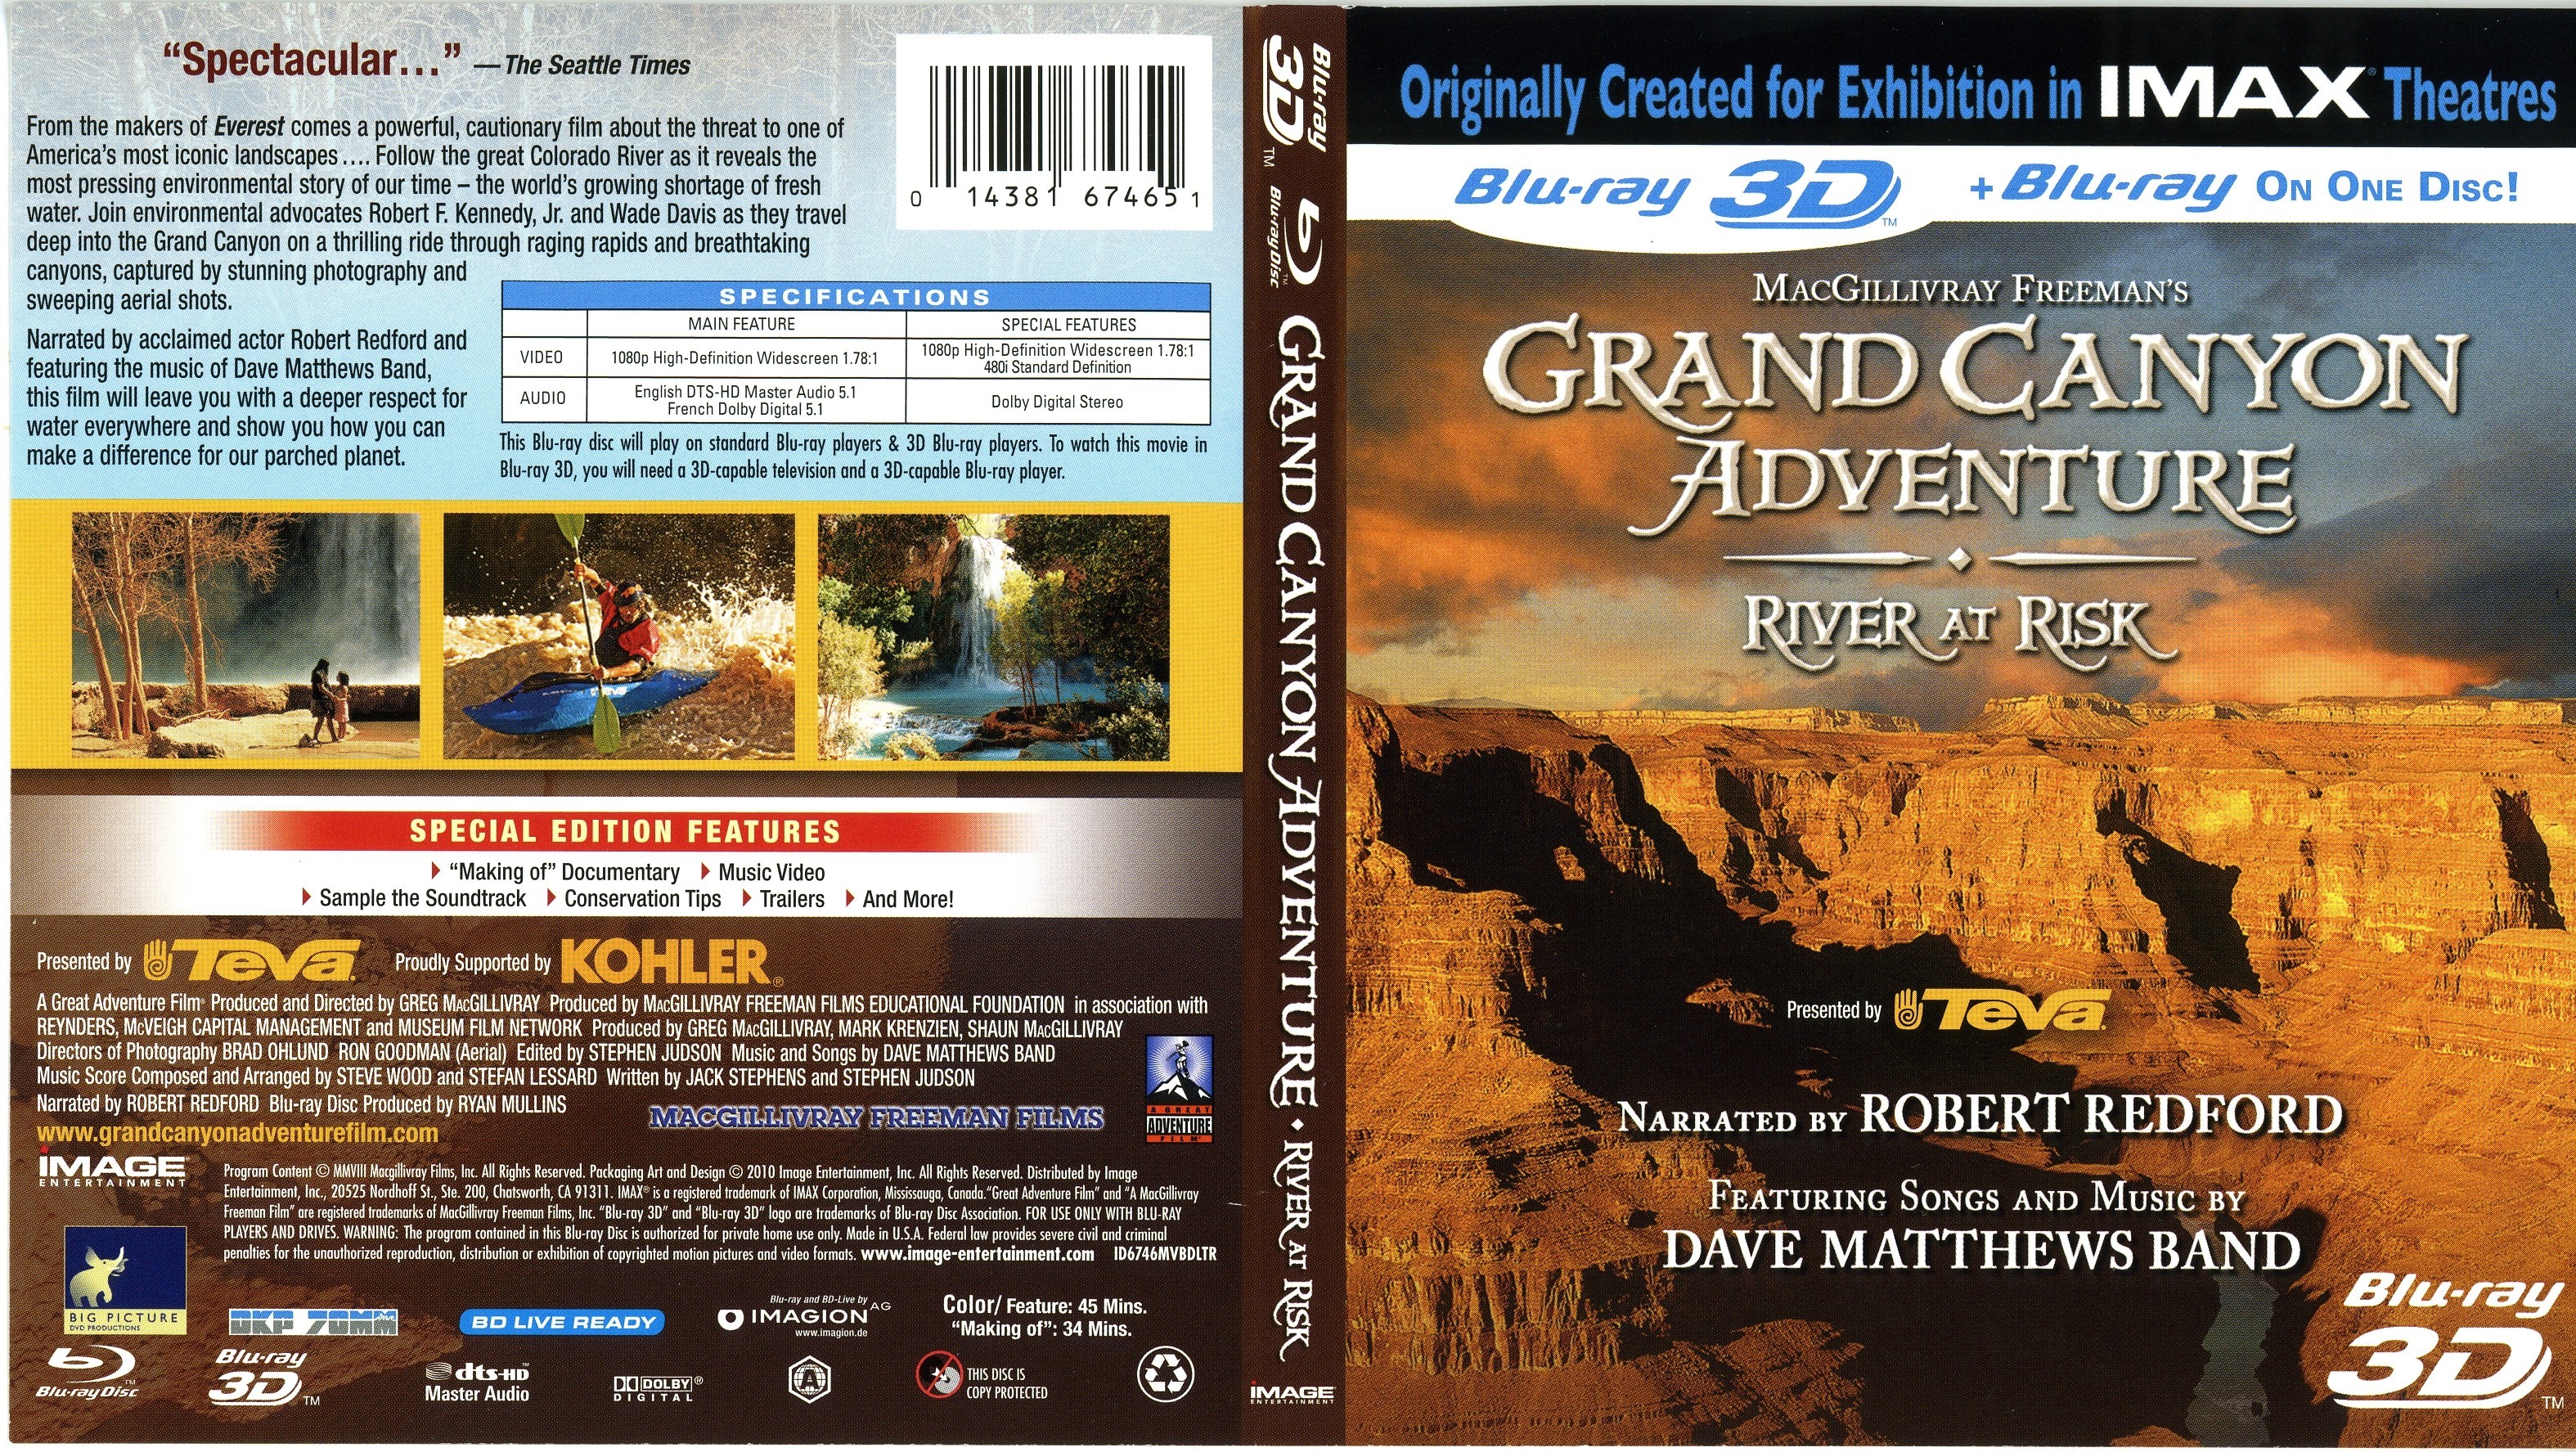 Jaquette DVD Grand Canyon Adventure Zone 1 (BLU-RAY)